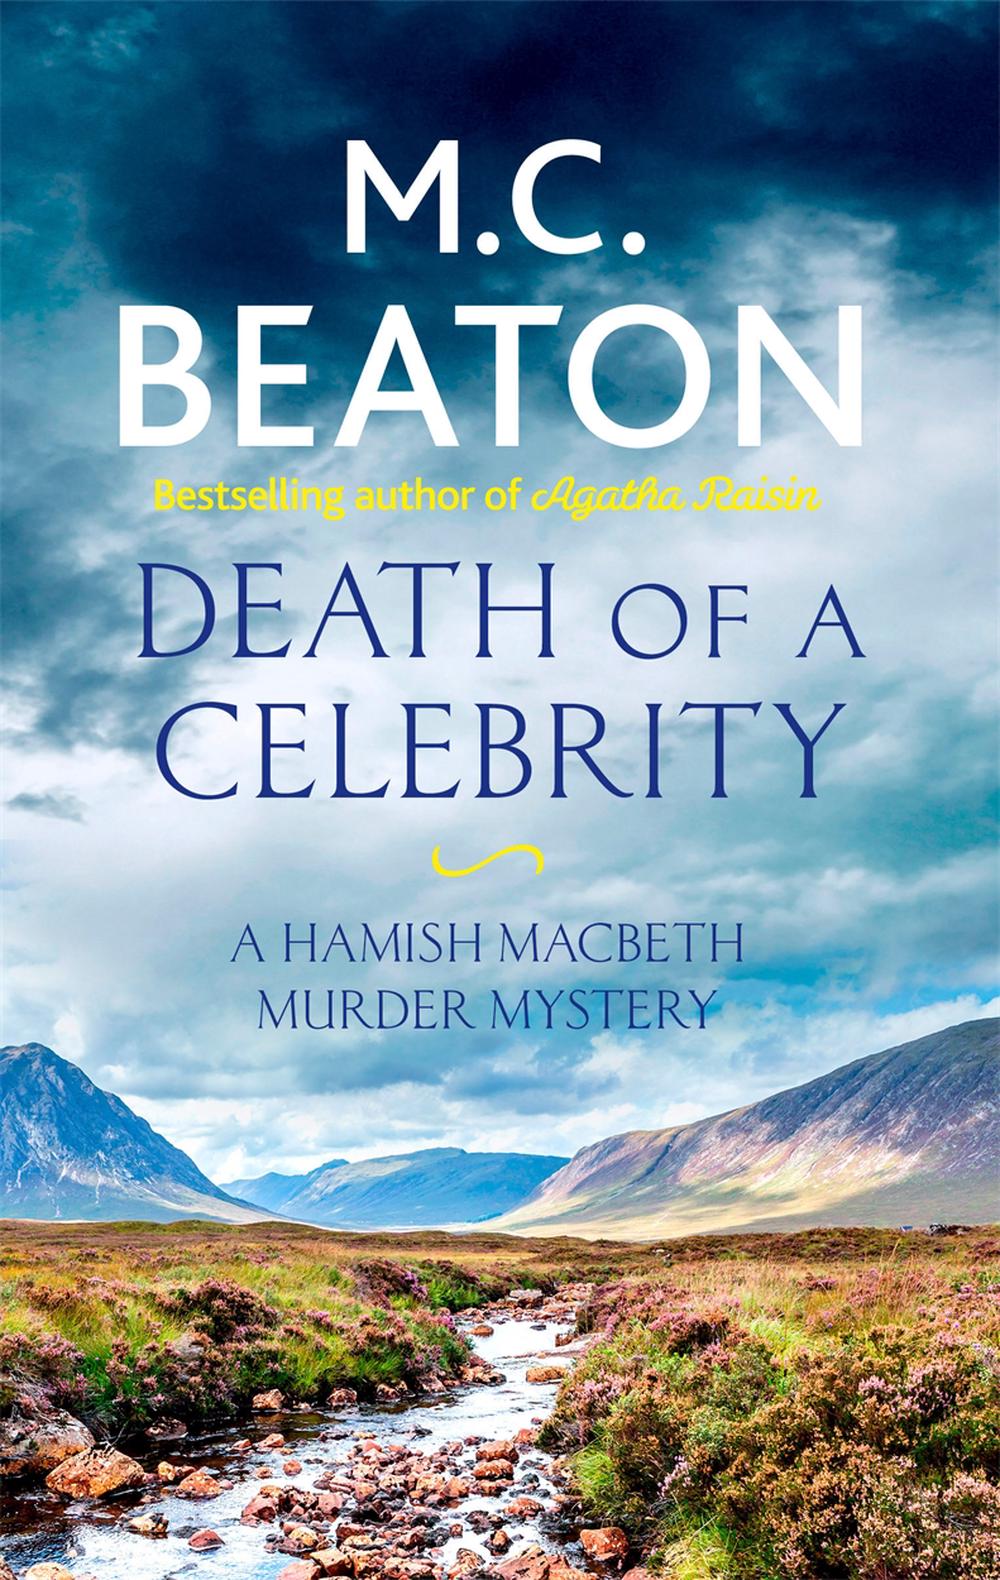 Death of a Celebrity by M.C. Beaton (English) Paperback